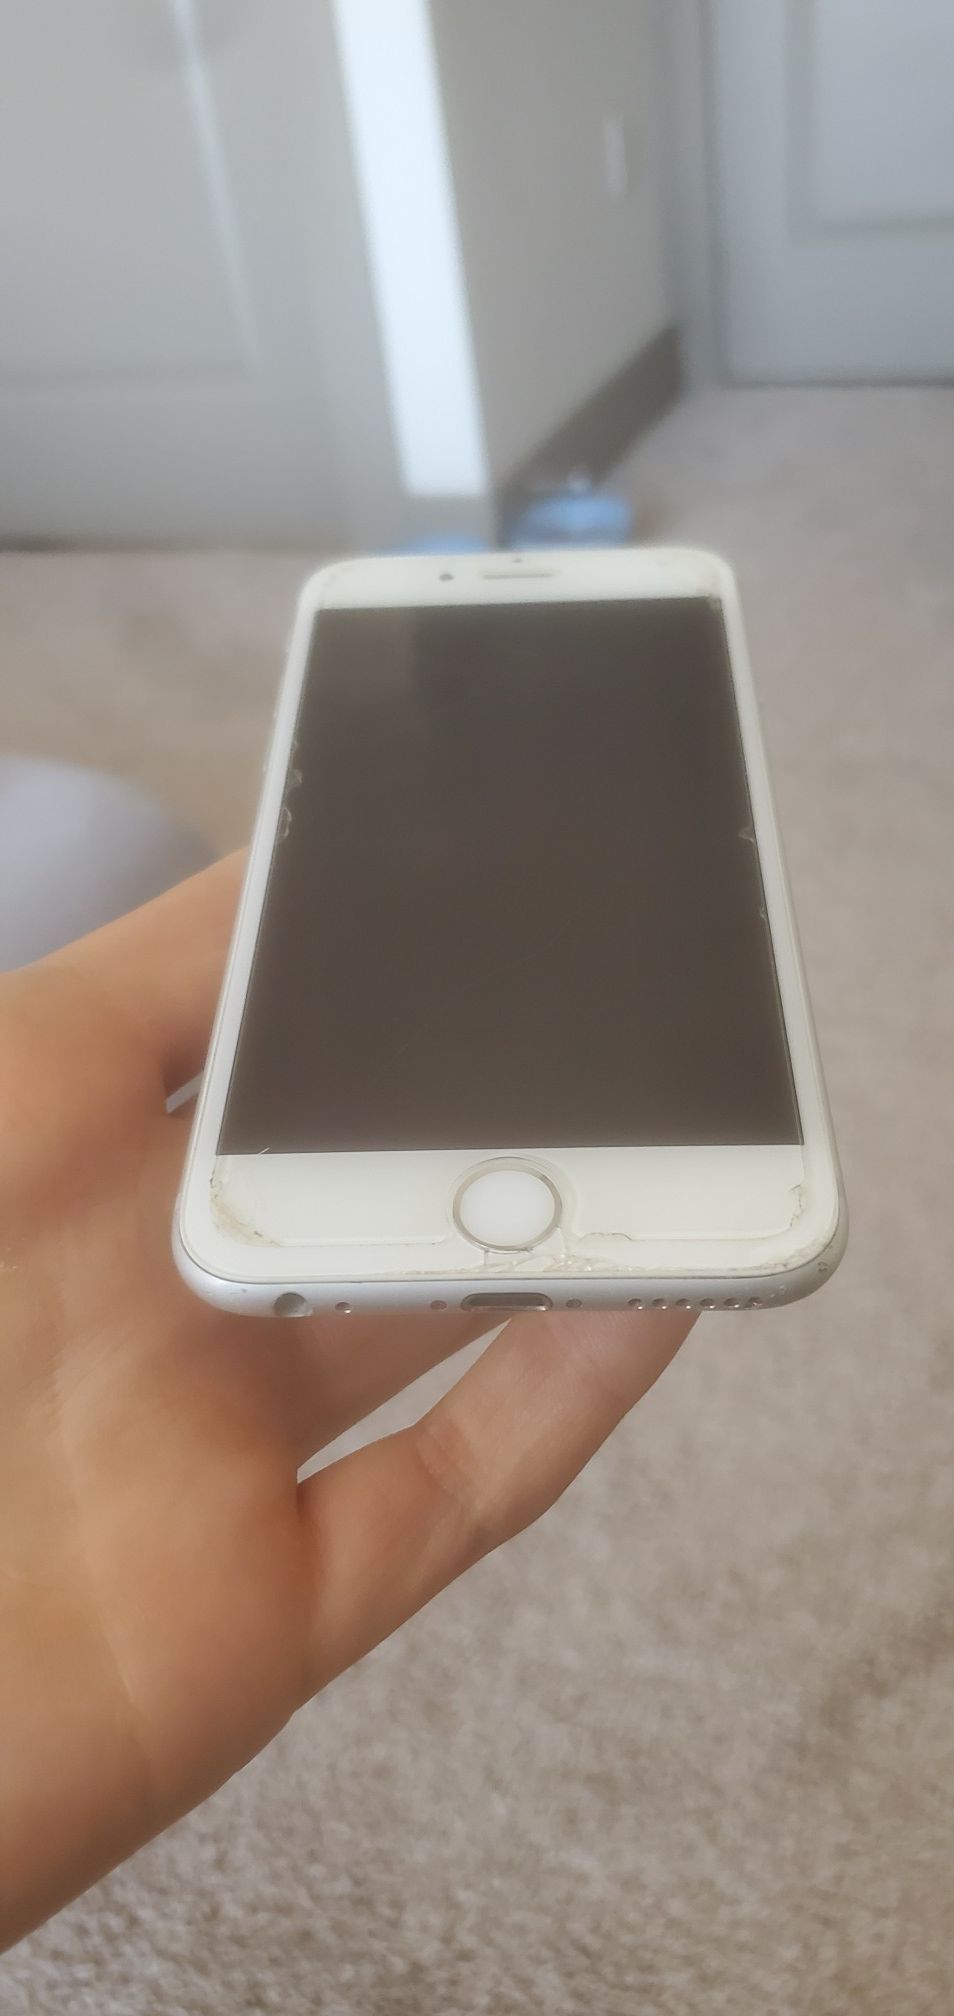 Iphone 6 for $110. No carrier and is unlocked Tiny cracks on bottom w slight scratches on front screen. Phone performs just fine though.